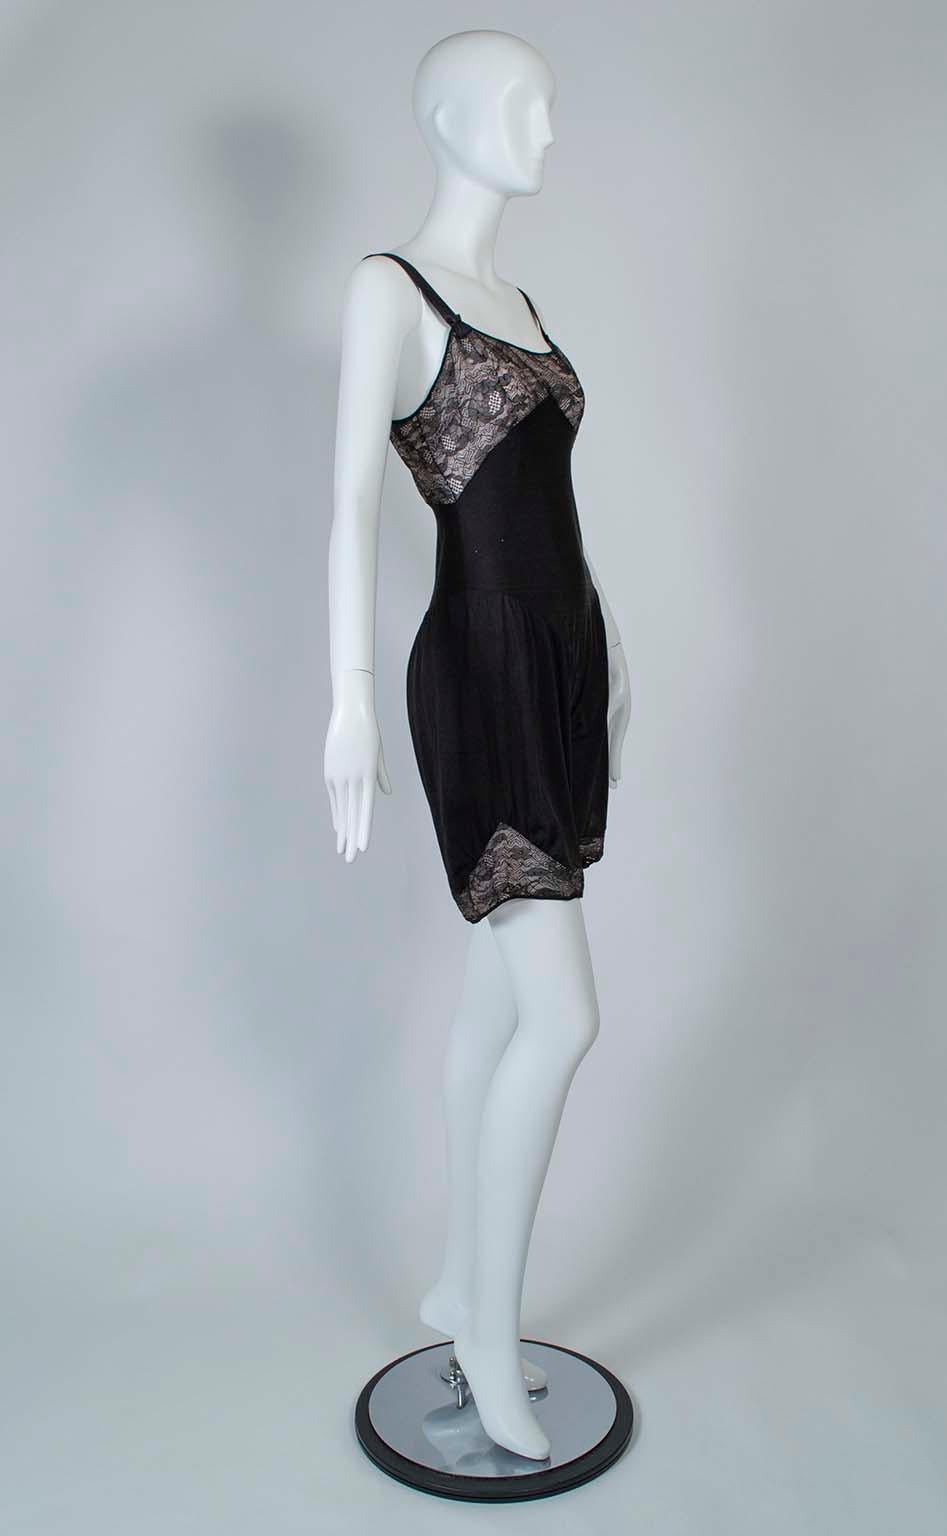 Featured in Harper’s Bazaar in 1928 (see photo), this beautiful piece of lingerie was the perfect foundation beneath the sleek, drop waisted flapper dresses of the era. It permitted newly-liberated women full range of motion and stretched with its